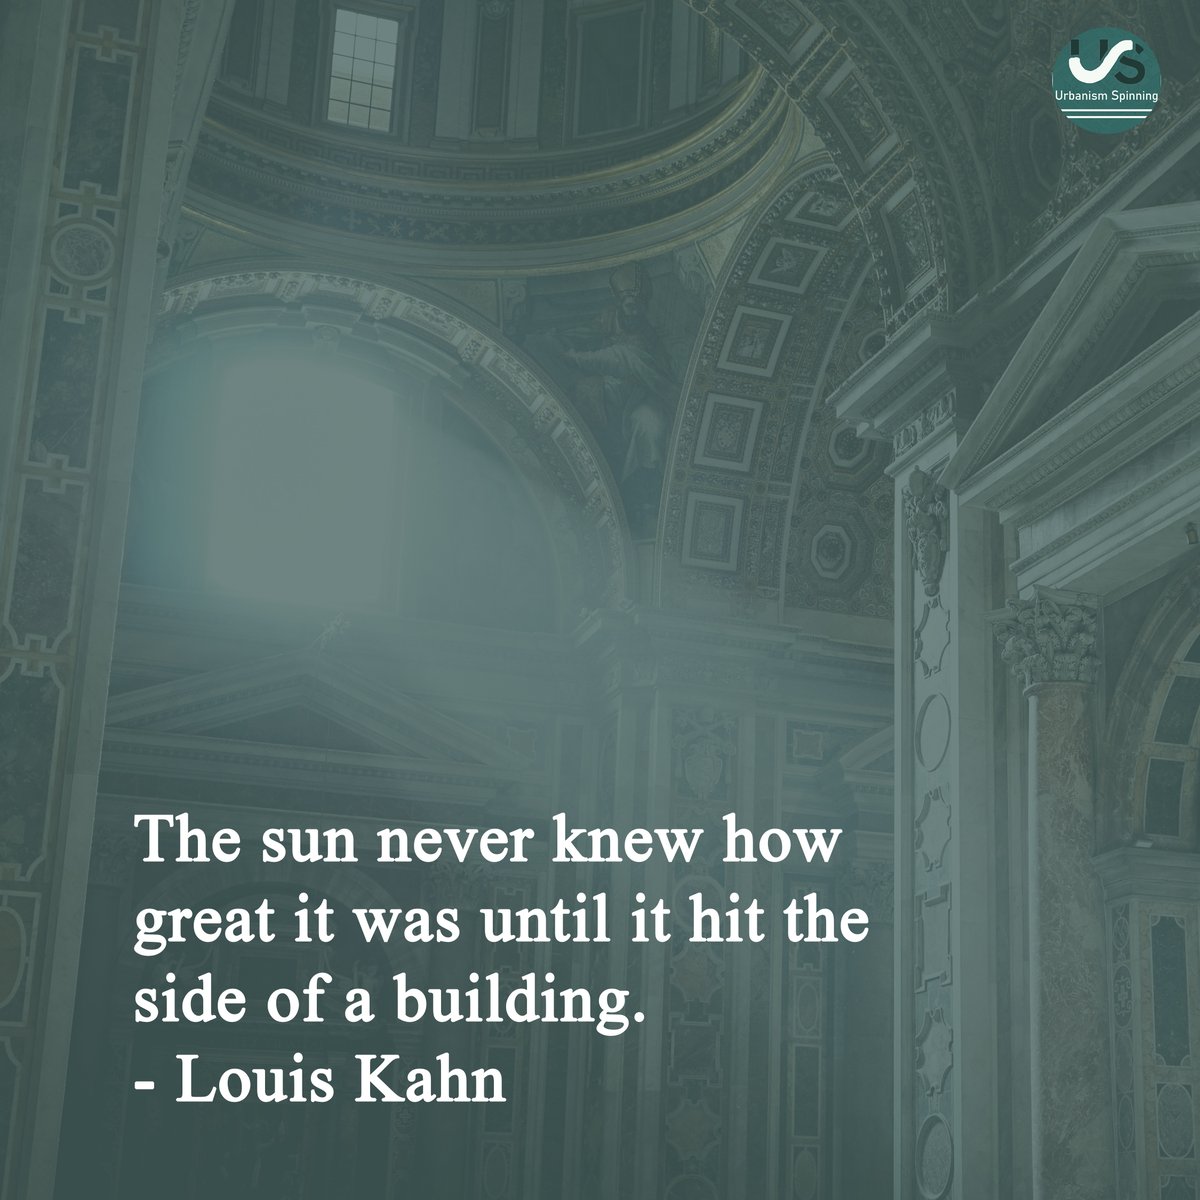 So magical is the ambience, when sun hits the side of a building!

#architecture #interiordesign #interior #quotes #archistudent #quoteoftheday #exterior #design